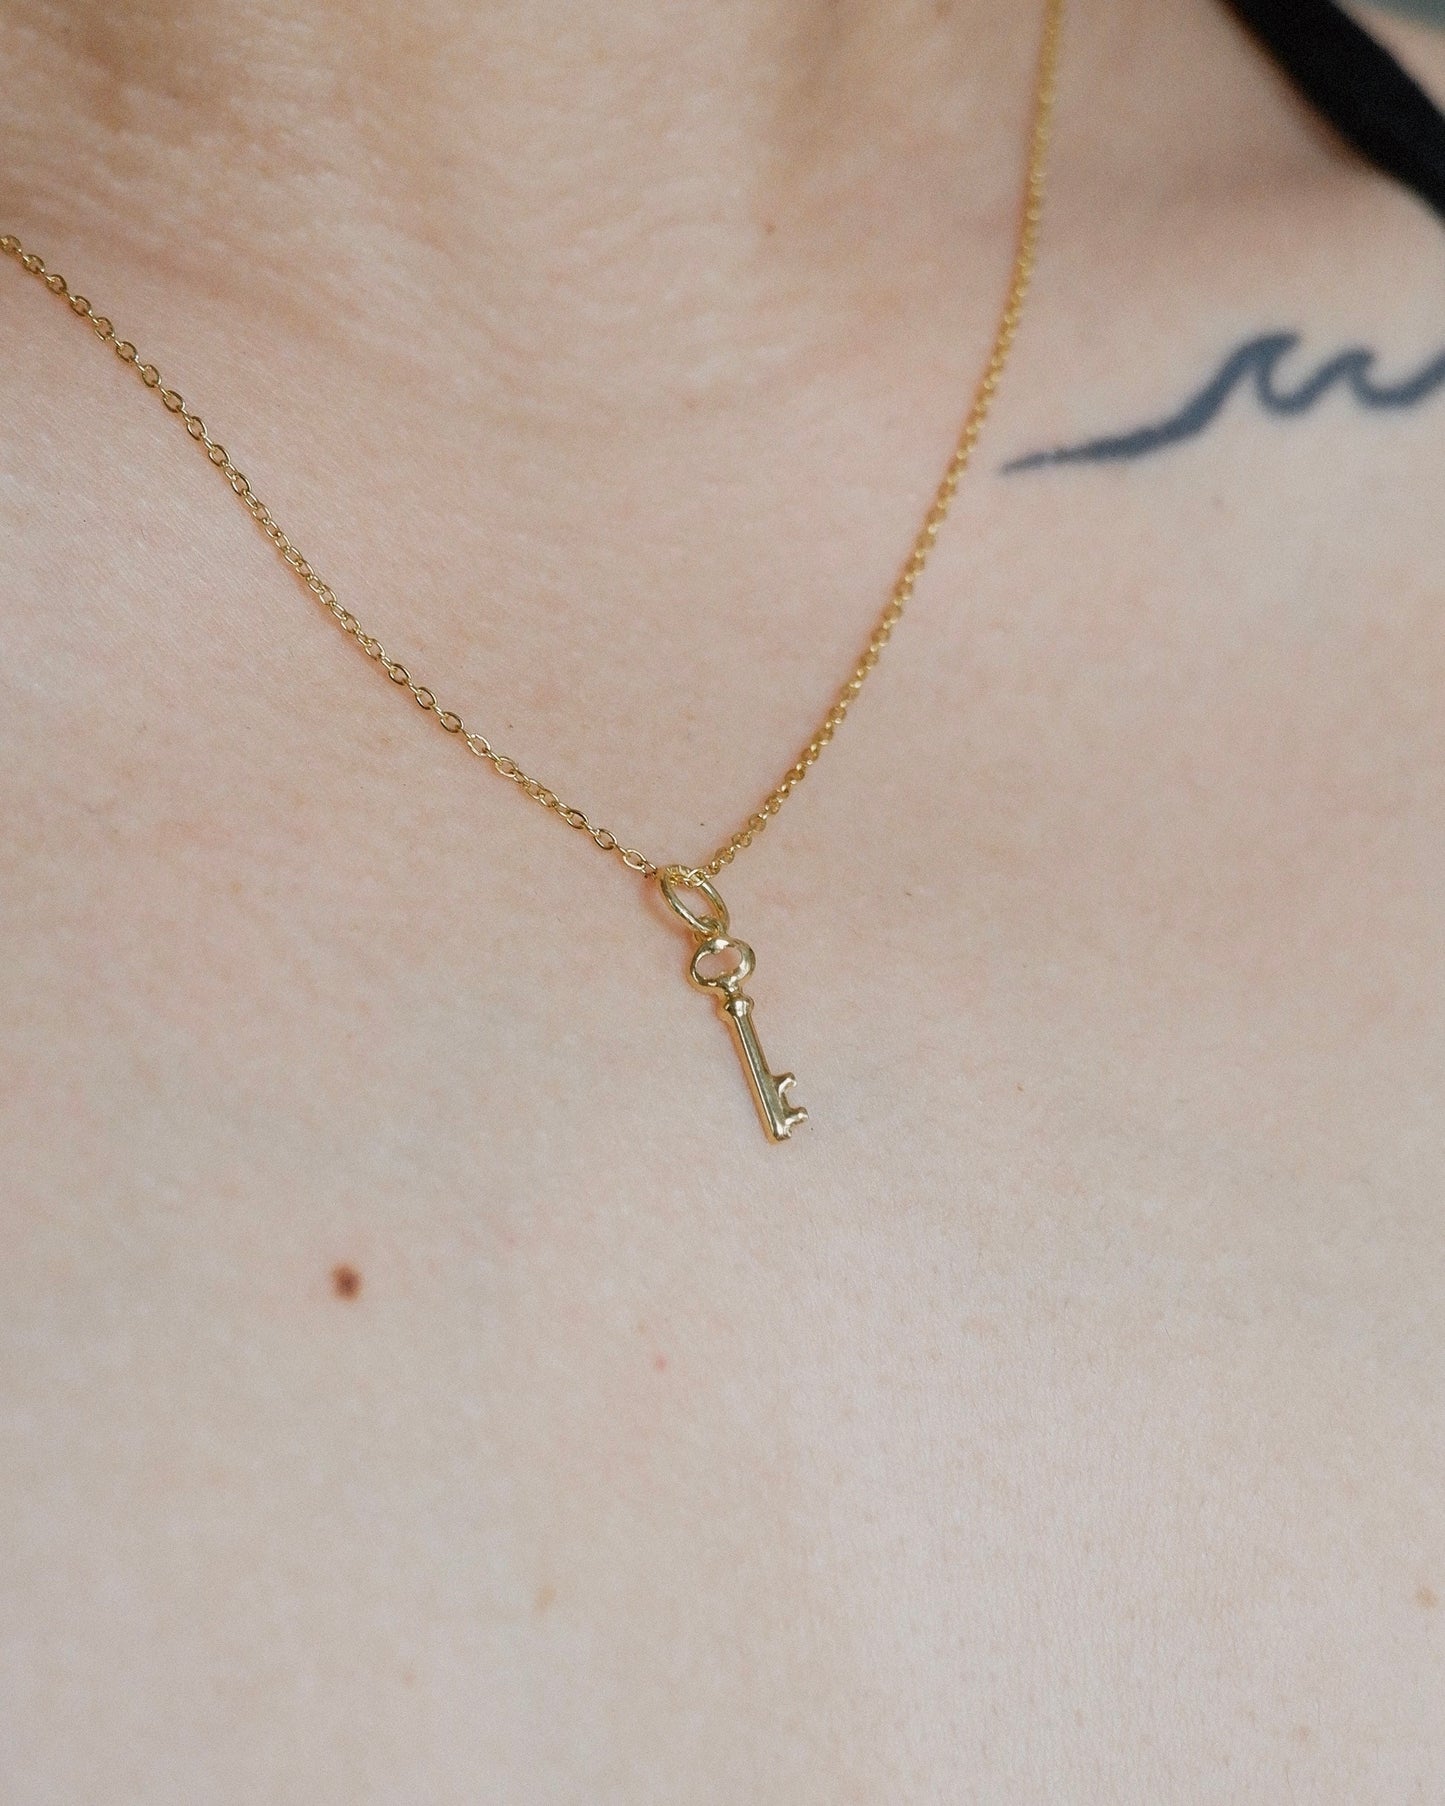 The Mini Key Pendant in Solid Gold